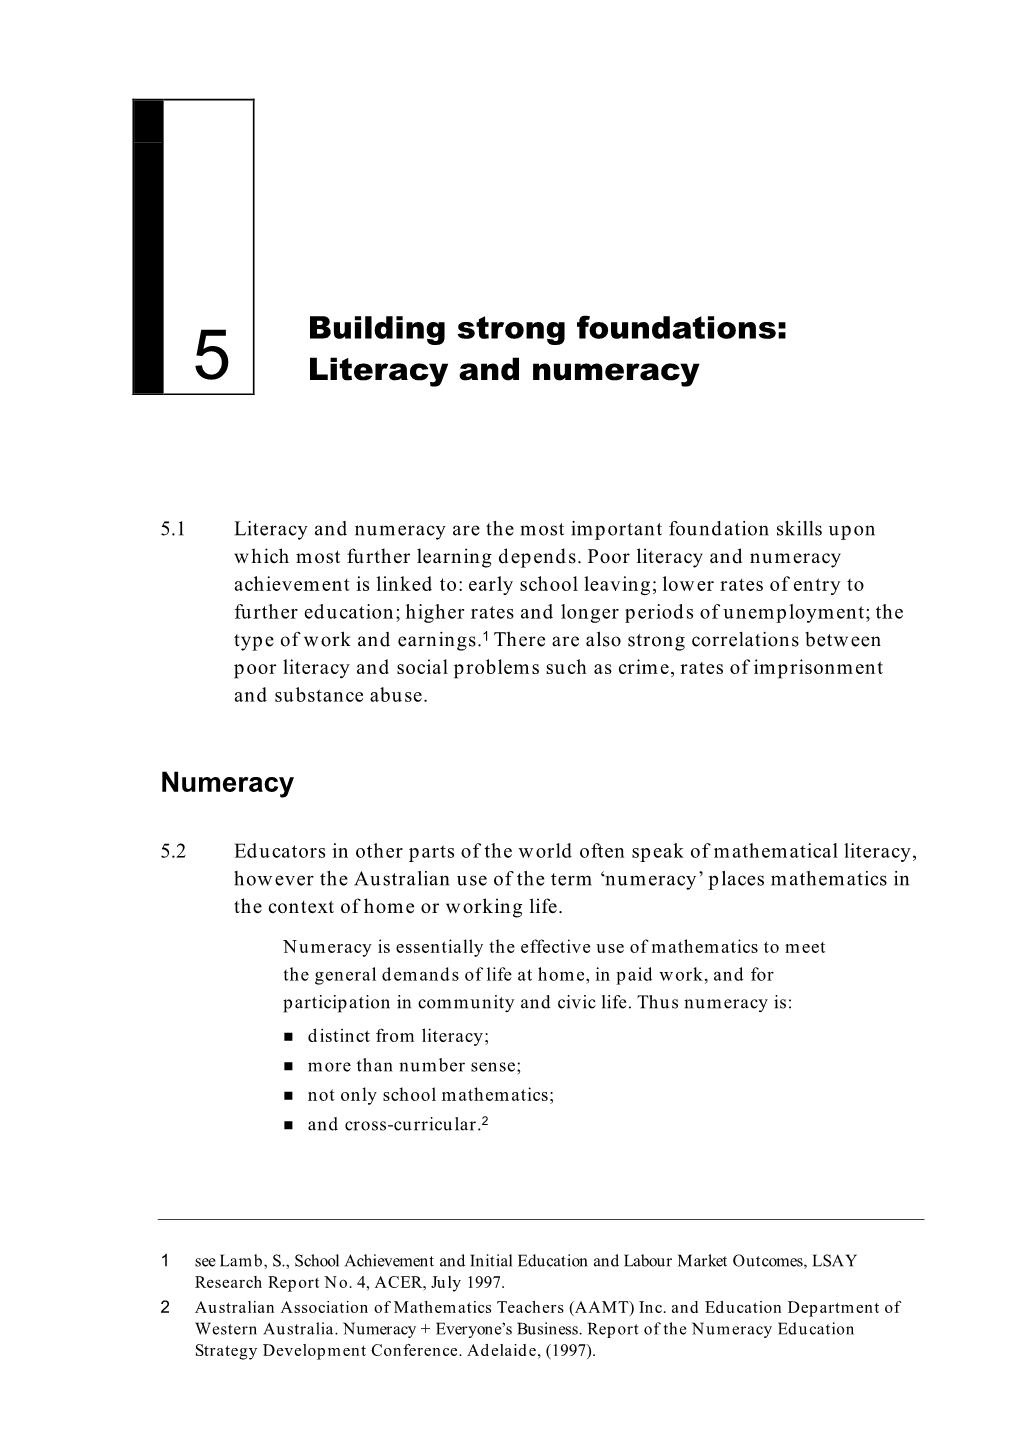 Chapter 5: Building Strong Foundations: Literacy and Numberacy